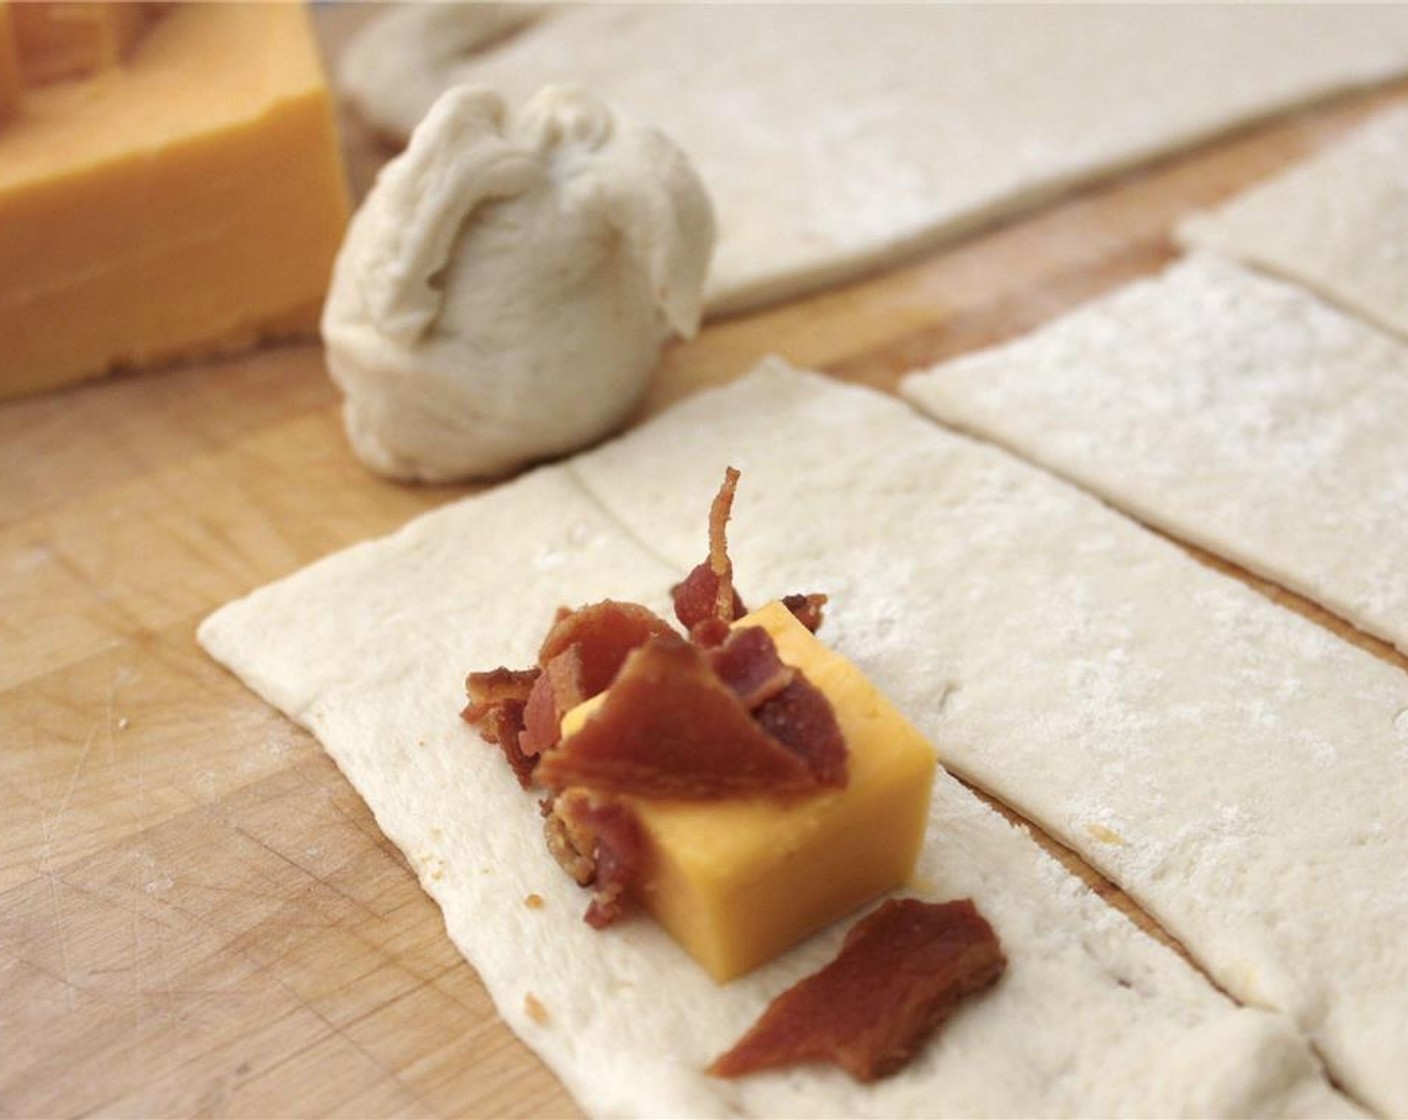 step 2 Cut the Pizza Dough (1 pckg) into approx 3x5-inch strips. Place a cube of Cheddar Cheese (2 cups) and some Bacon (to taste) crumbles on each strip.